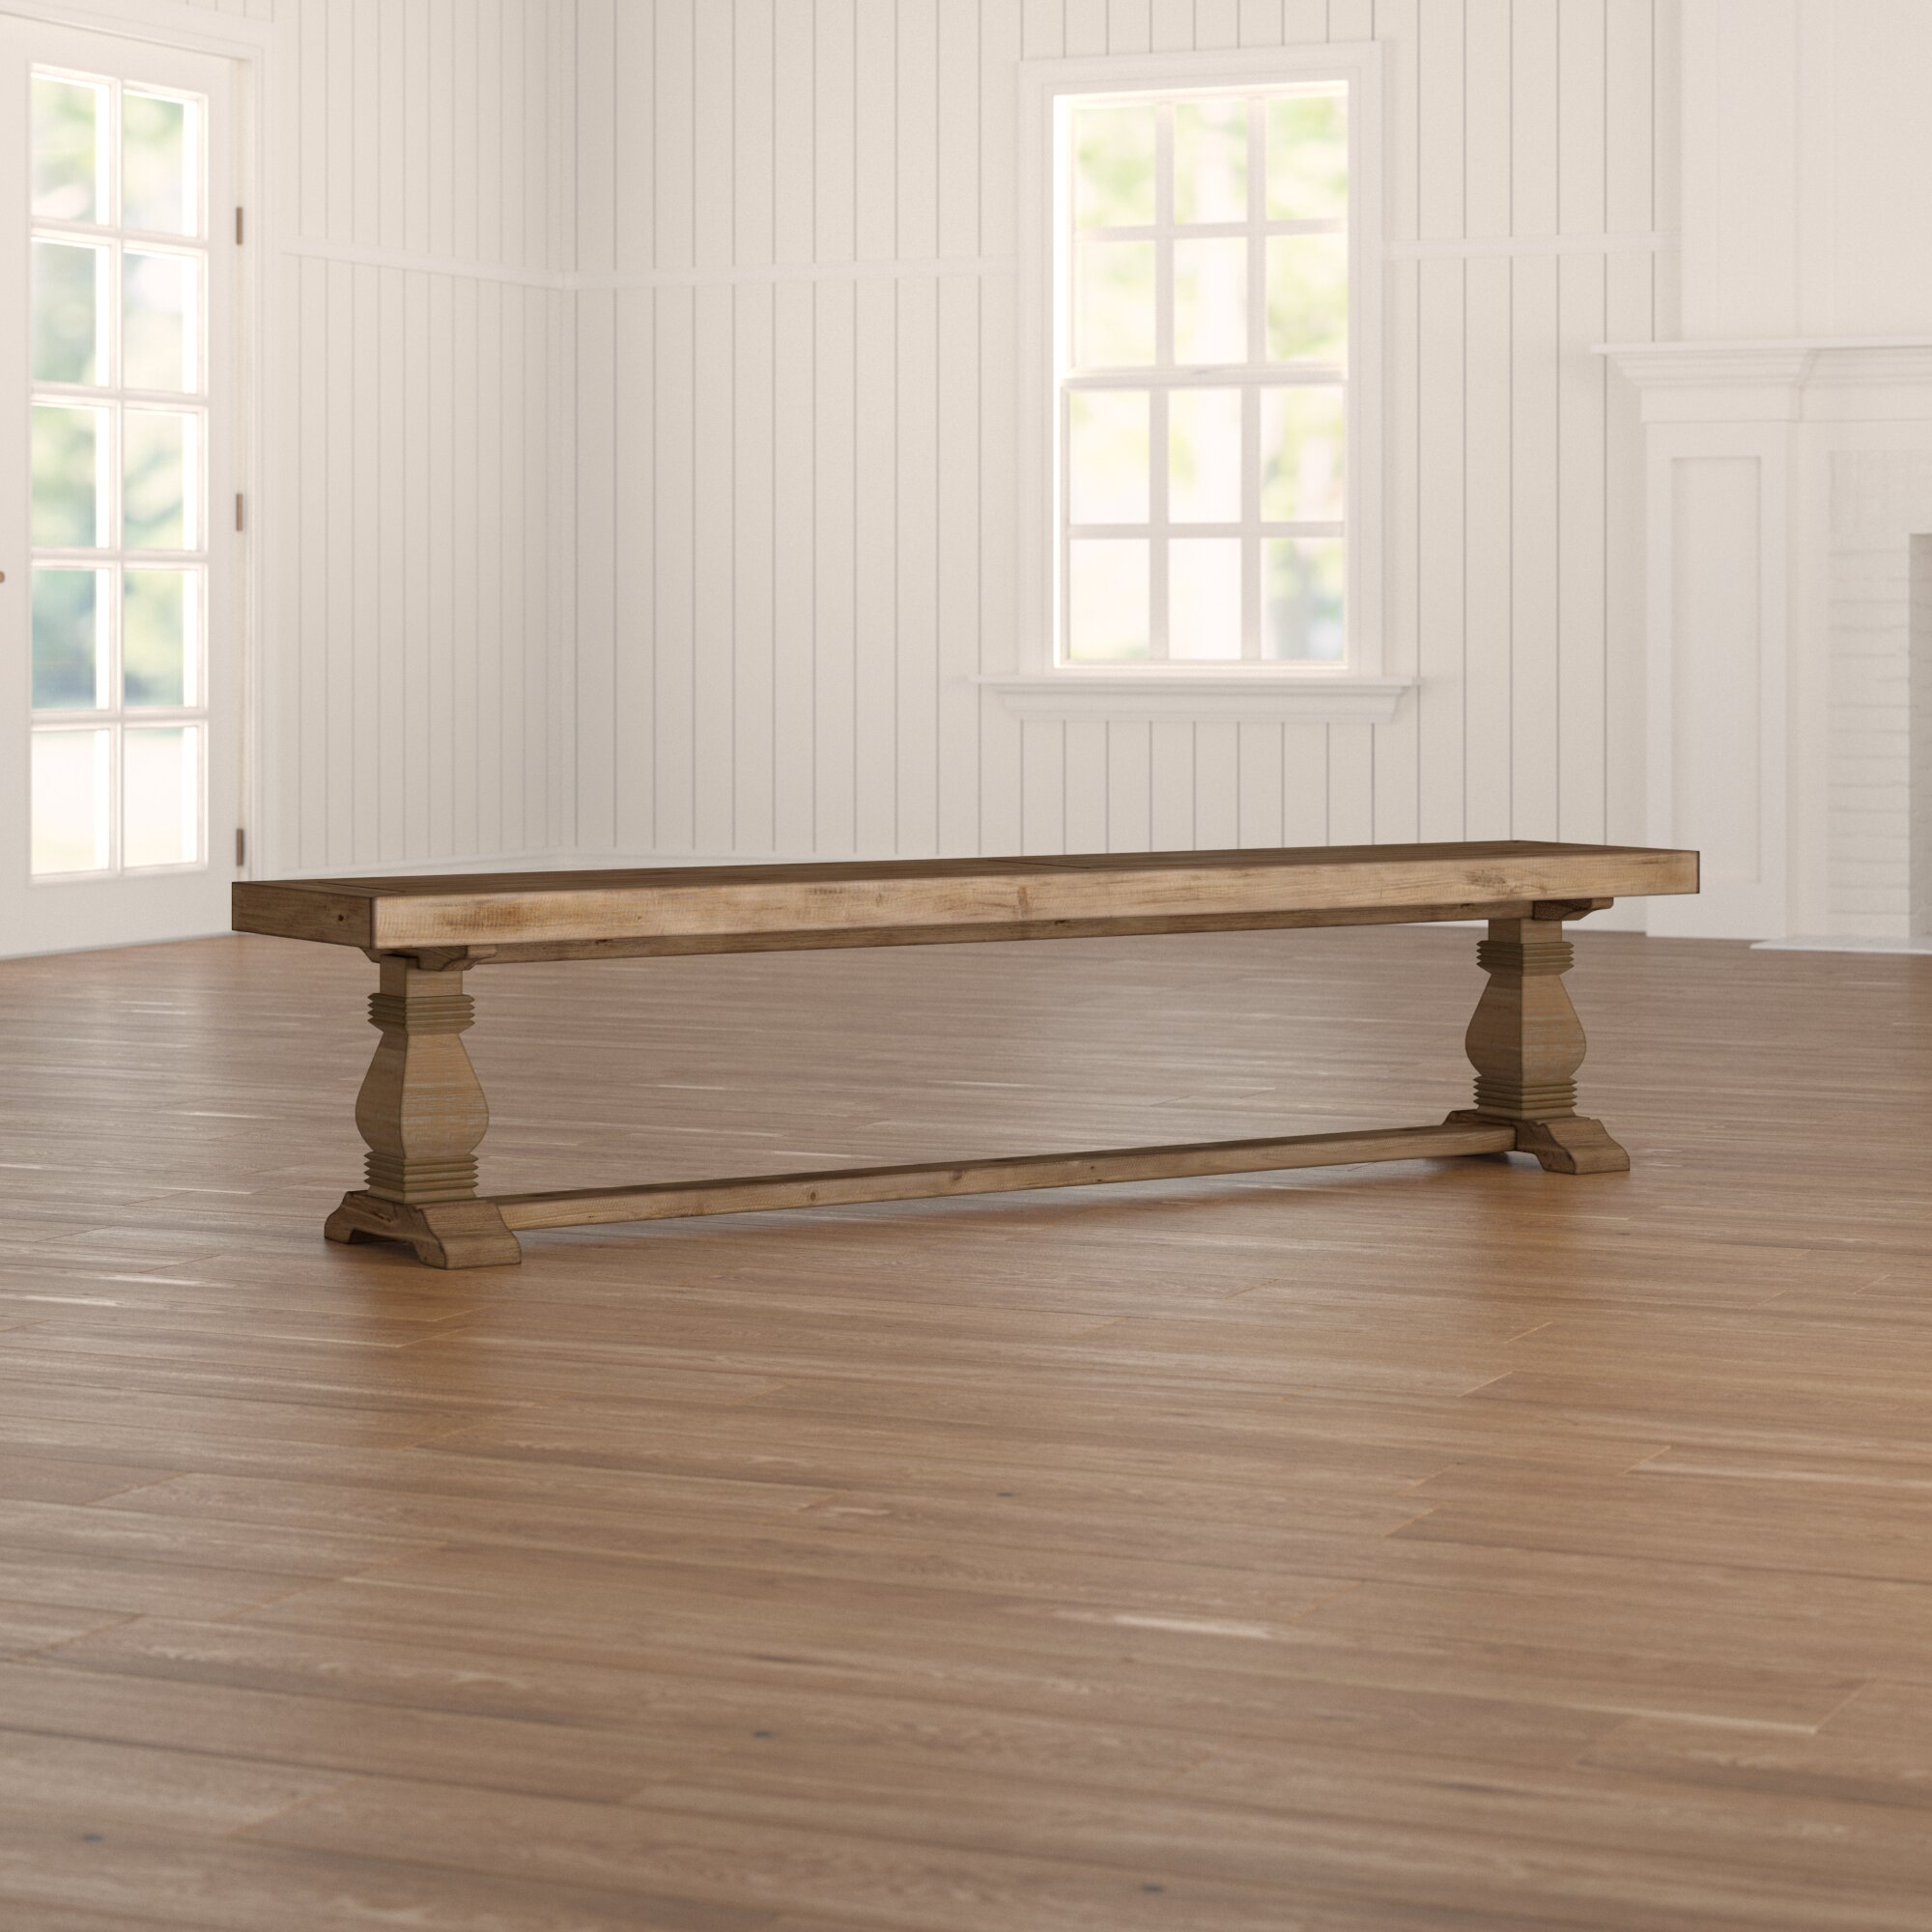 Millendon Solid Wood Bench